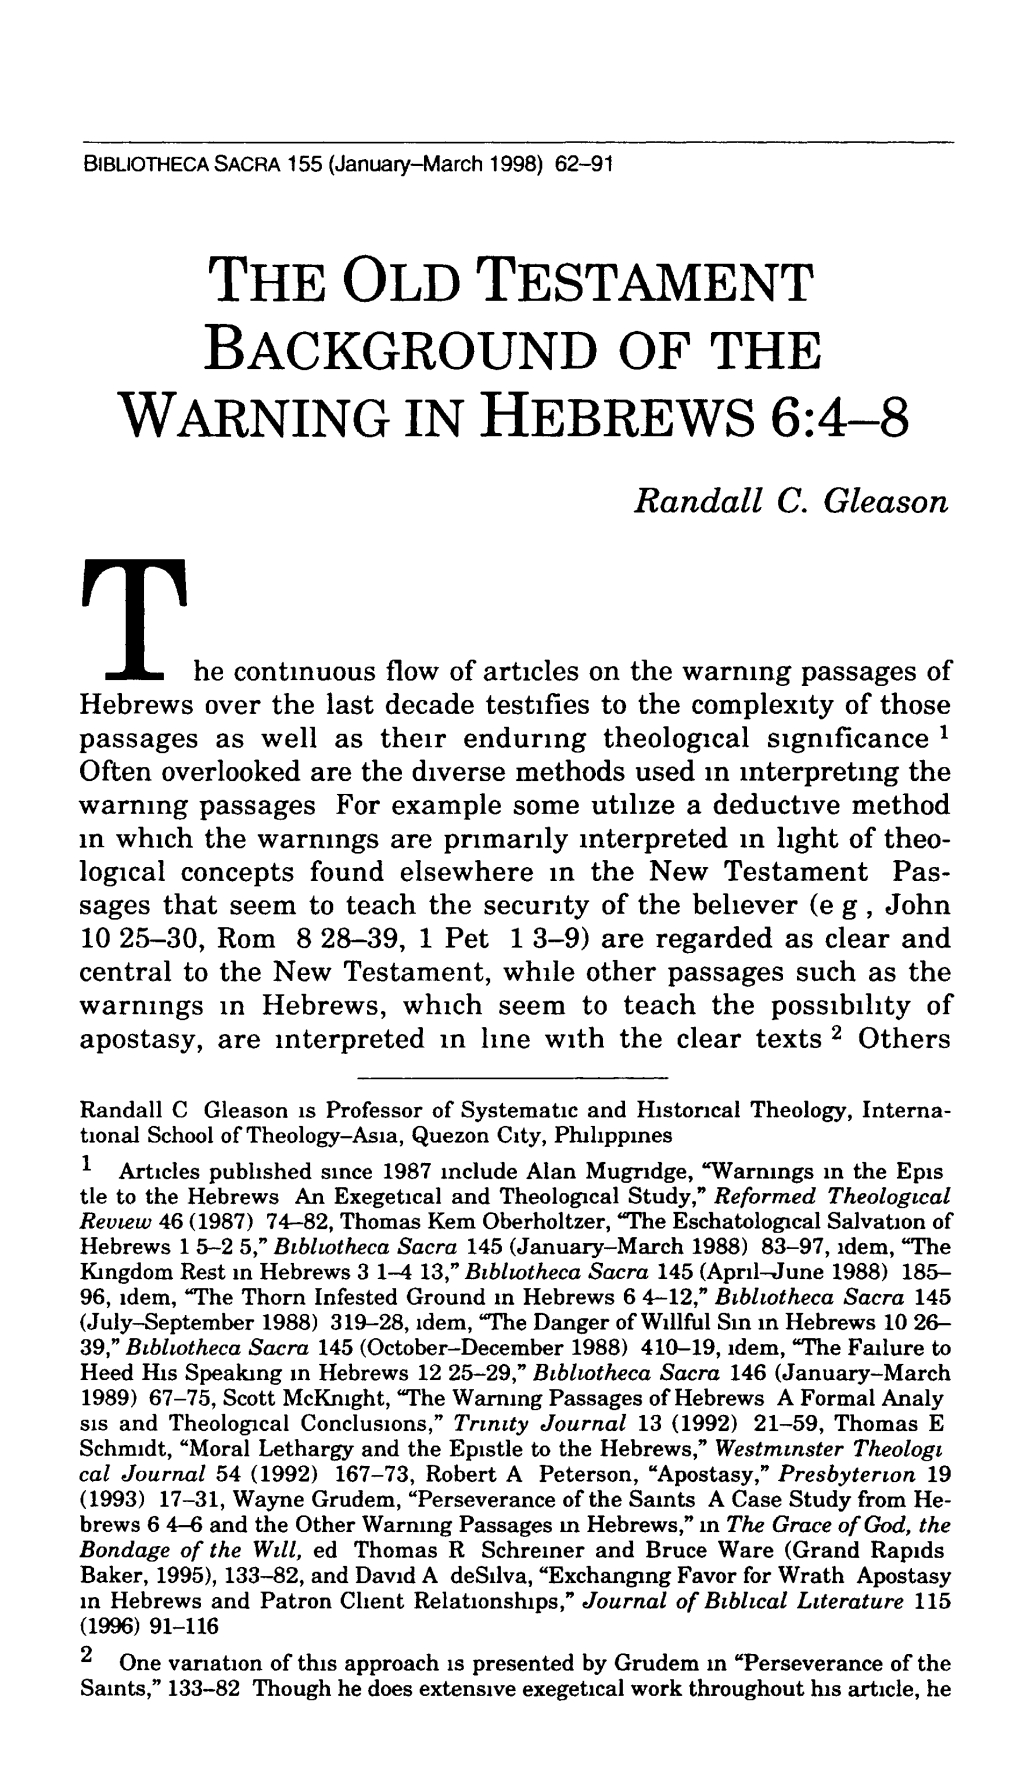 THE OLD TESTAMENT BACKGROUND of the WARNING in HEBREWS 6:4-8 Τ Randall C